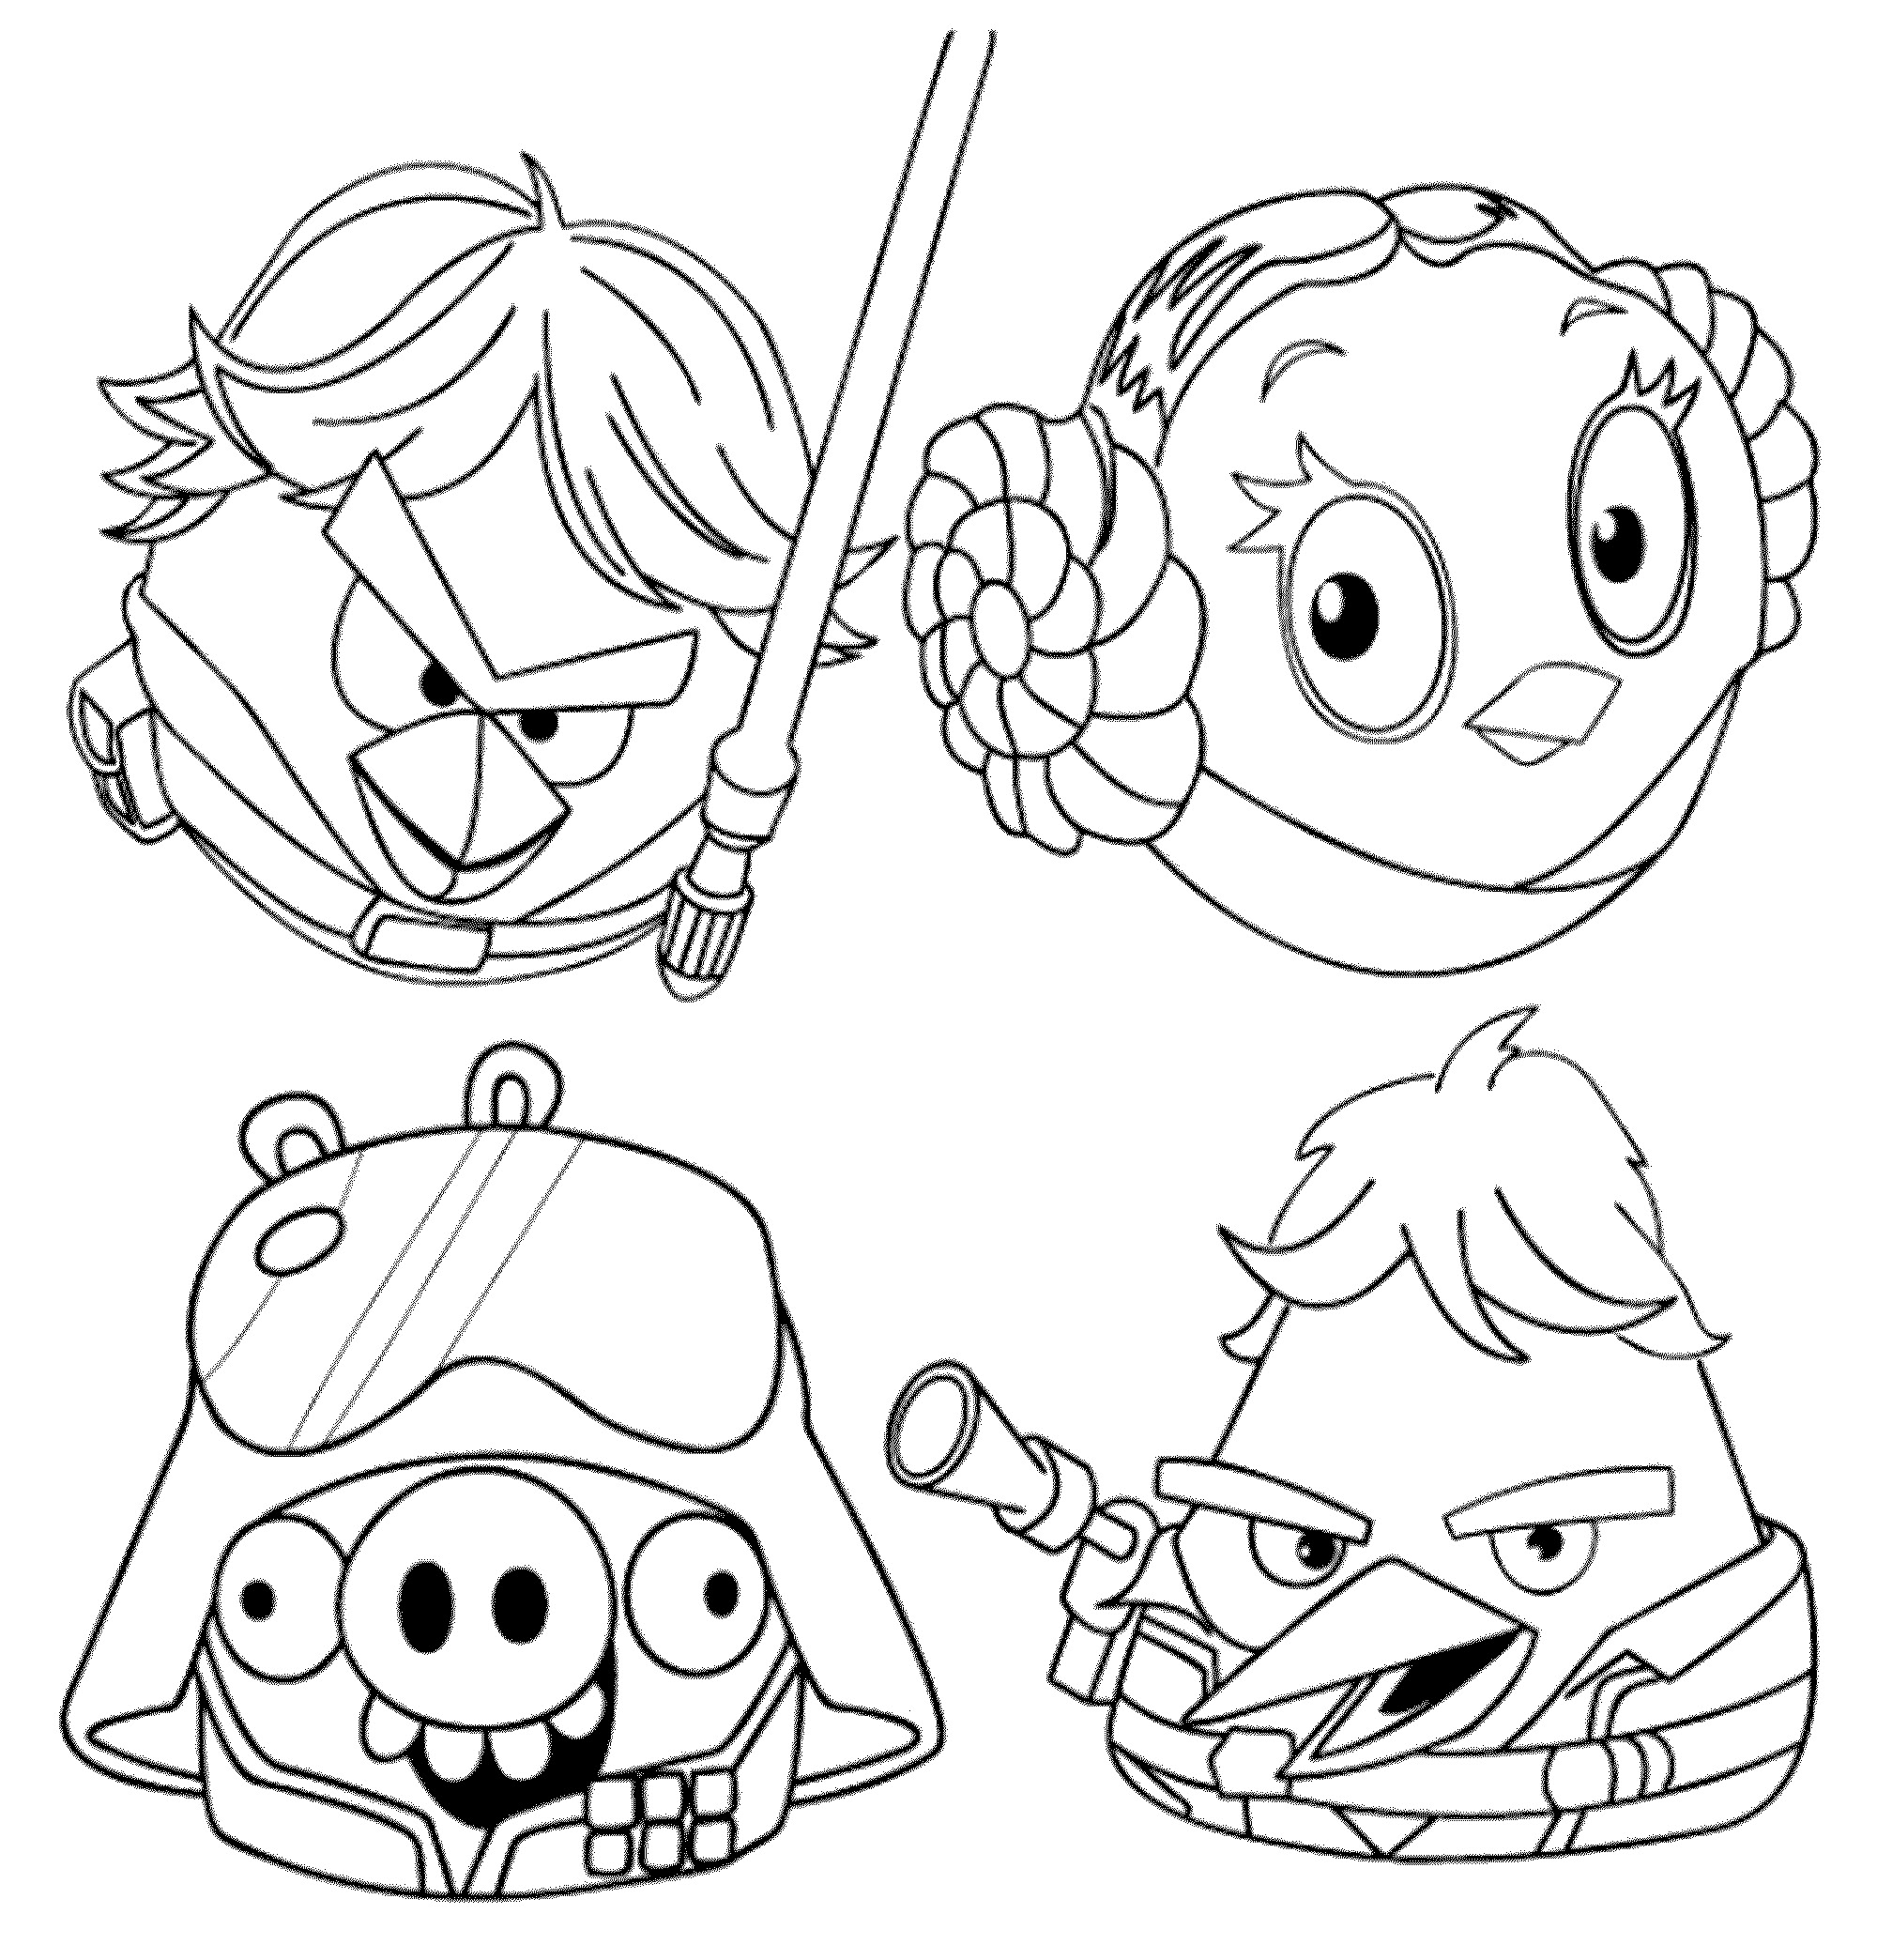 Download Cartoon Characters Coloring Pages Printable at ...